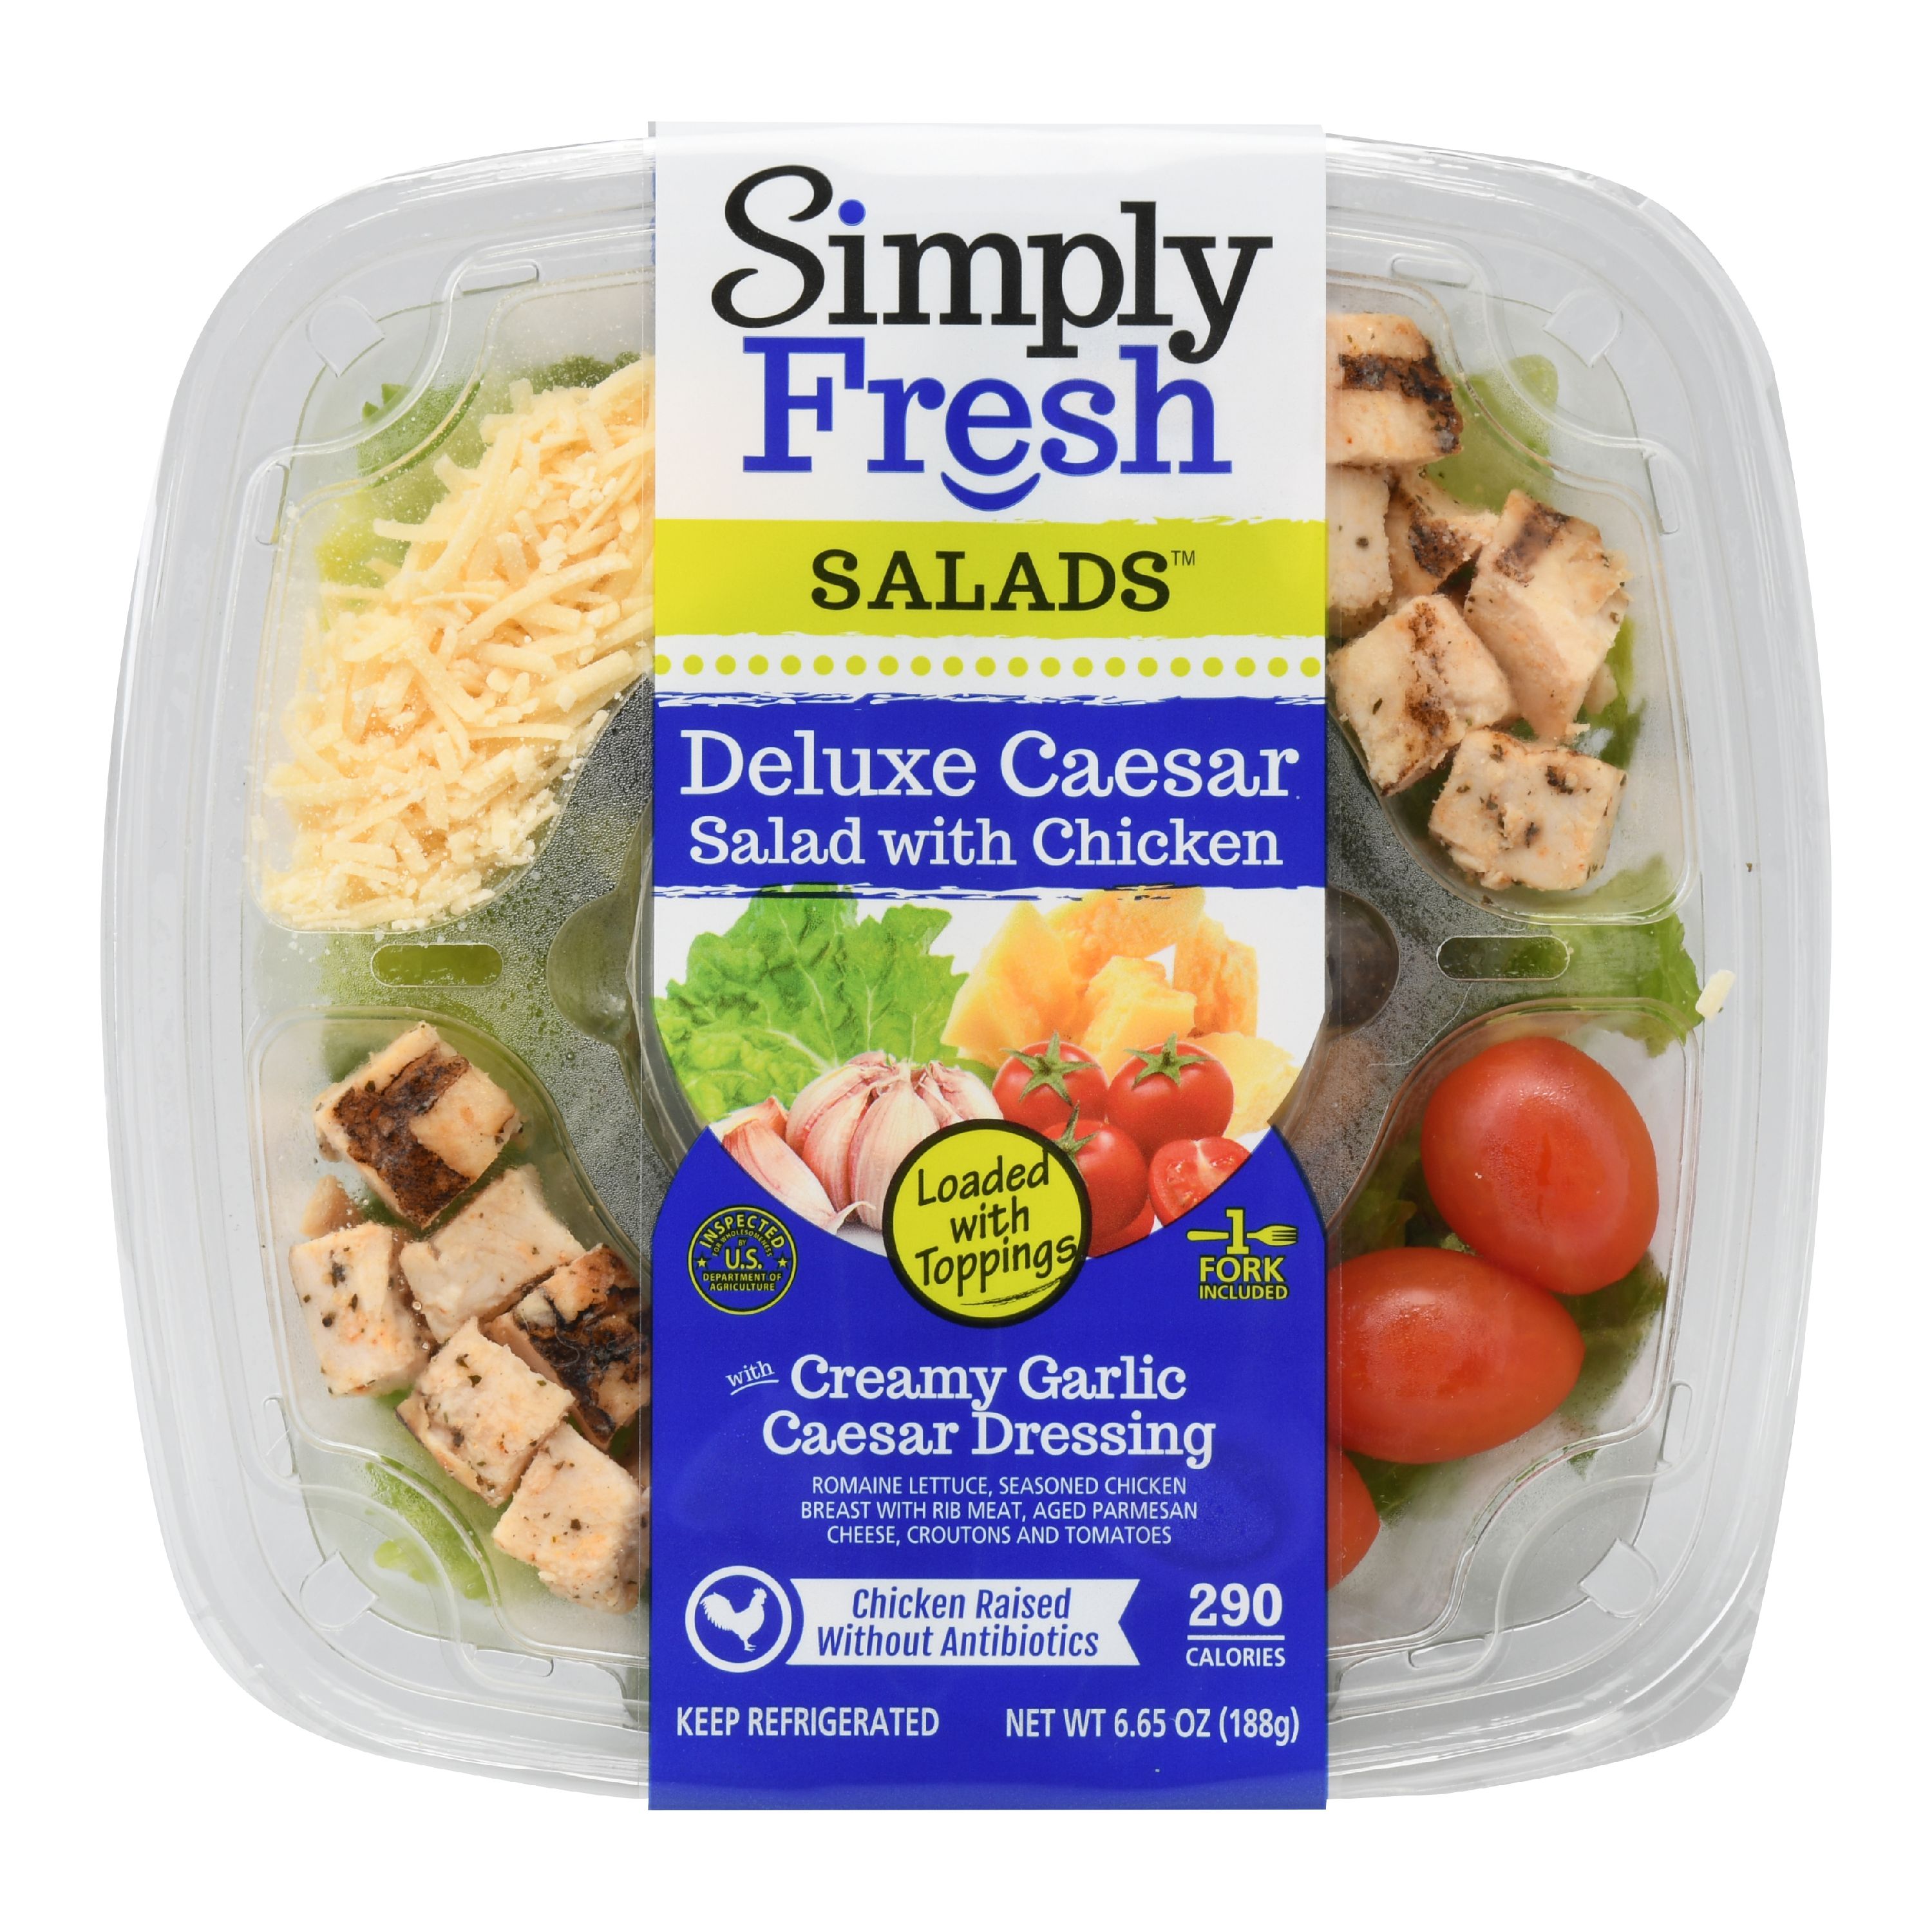 Deluxe Chopped Salad Kit